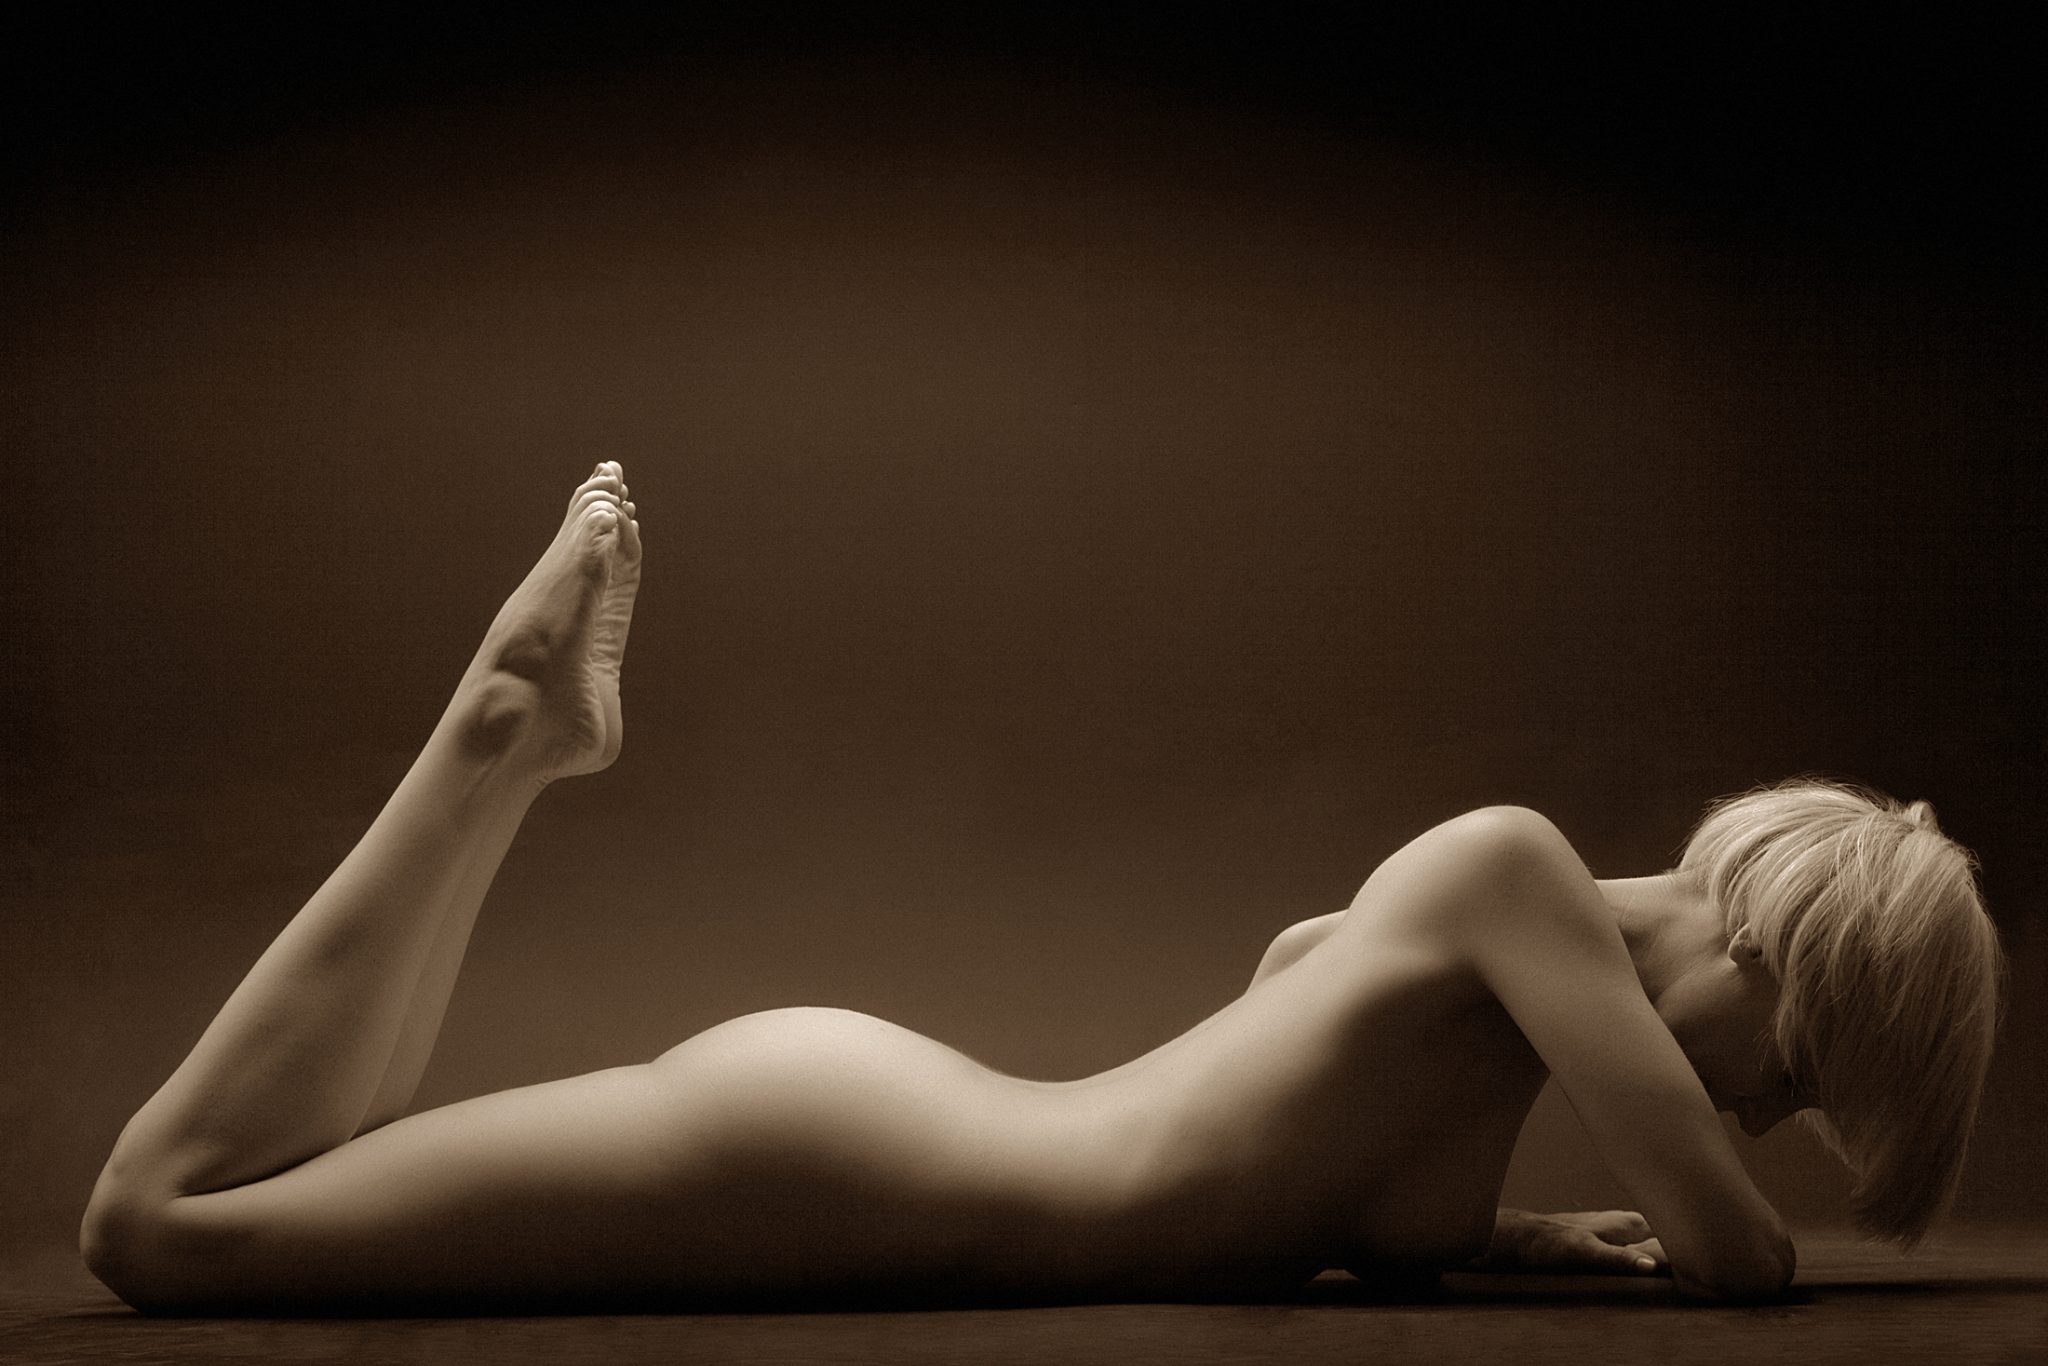 Moody, artistic nude photograph by Perth Photographers.